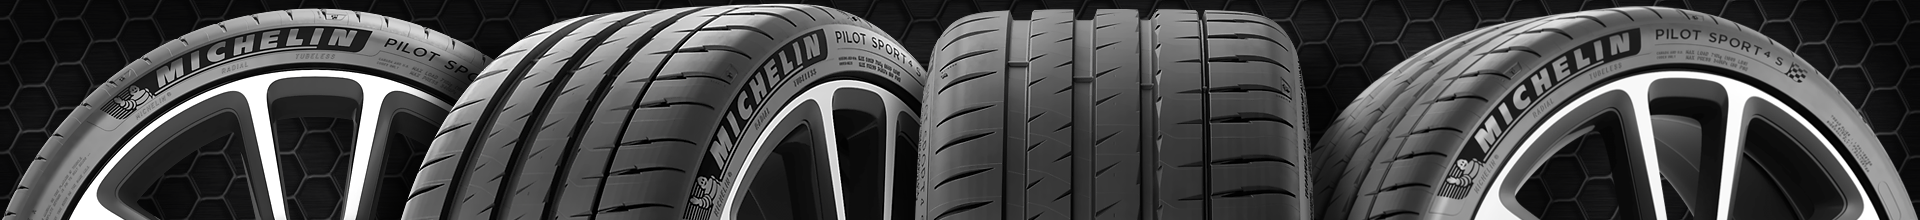 285 75 16 discount tires from Tire Outlet US